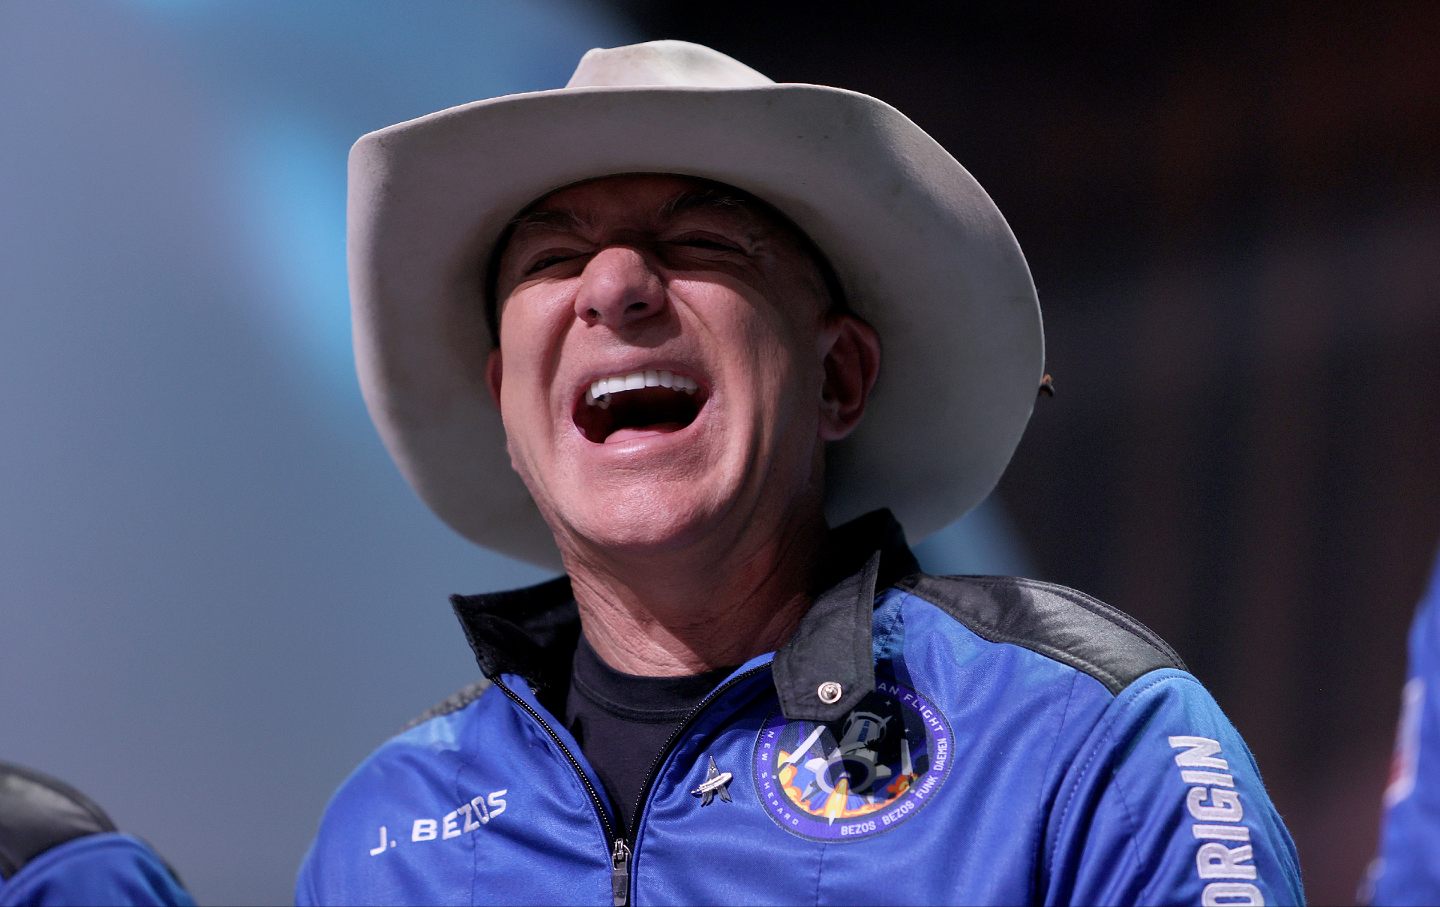 Washington Post owner Jeff Bezos laughs as he speaks about his flight into space on Blue Origin’s New Shepard, during a press conference on July 20, 2021, in Van Horn, Tex.